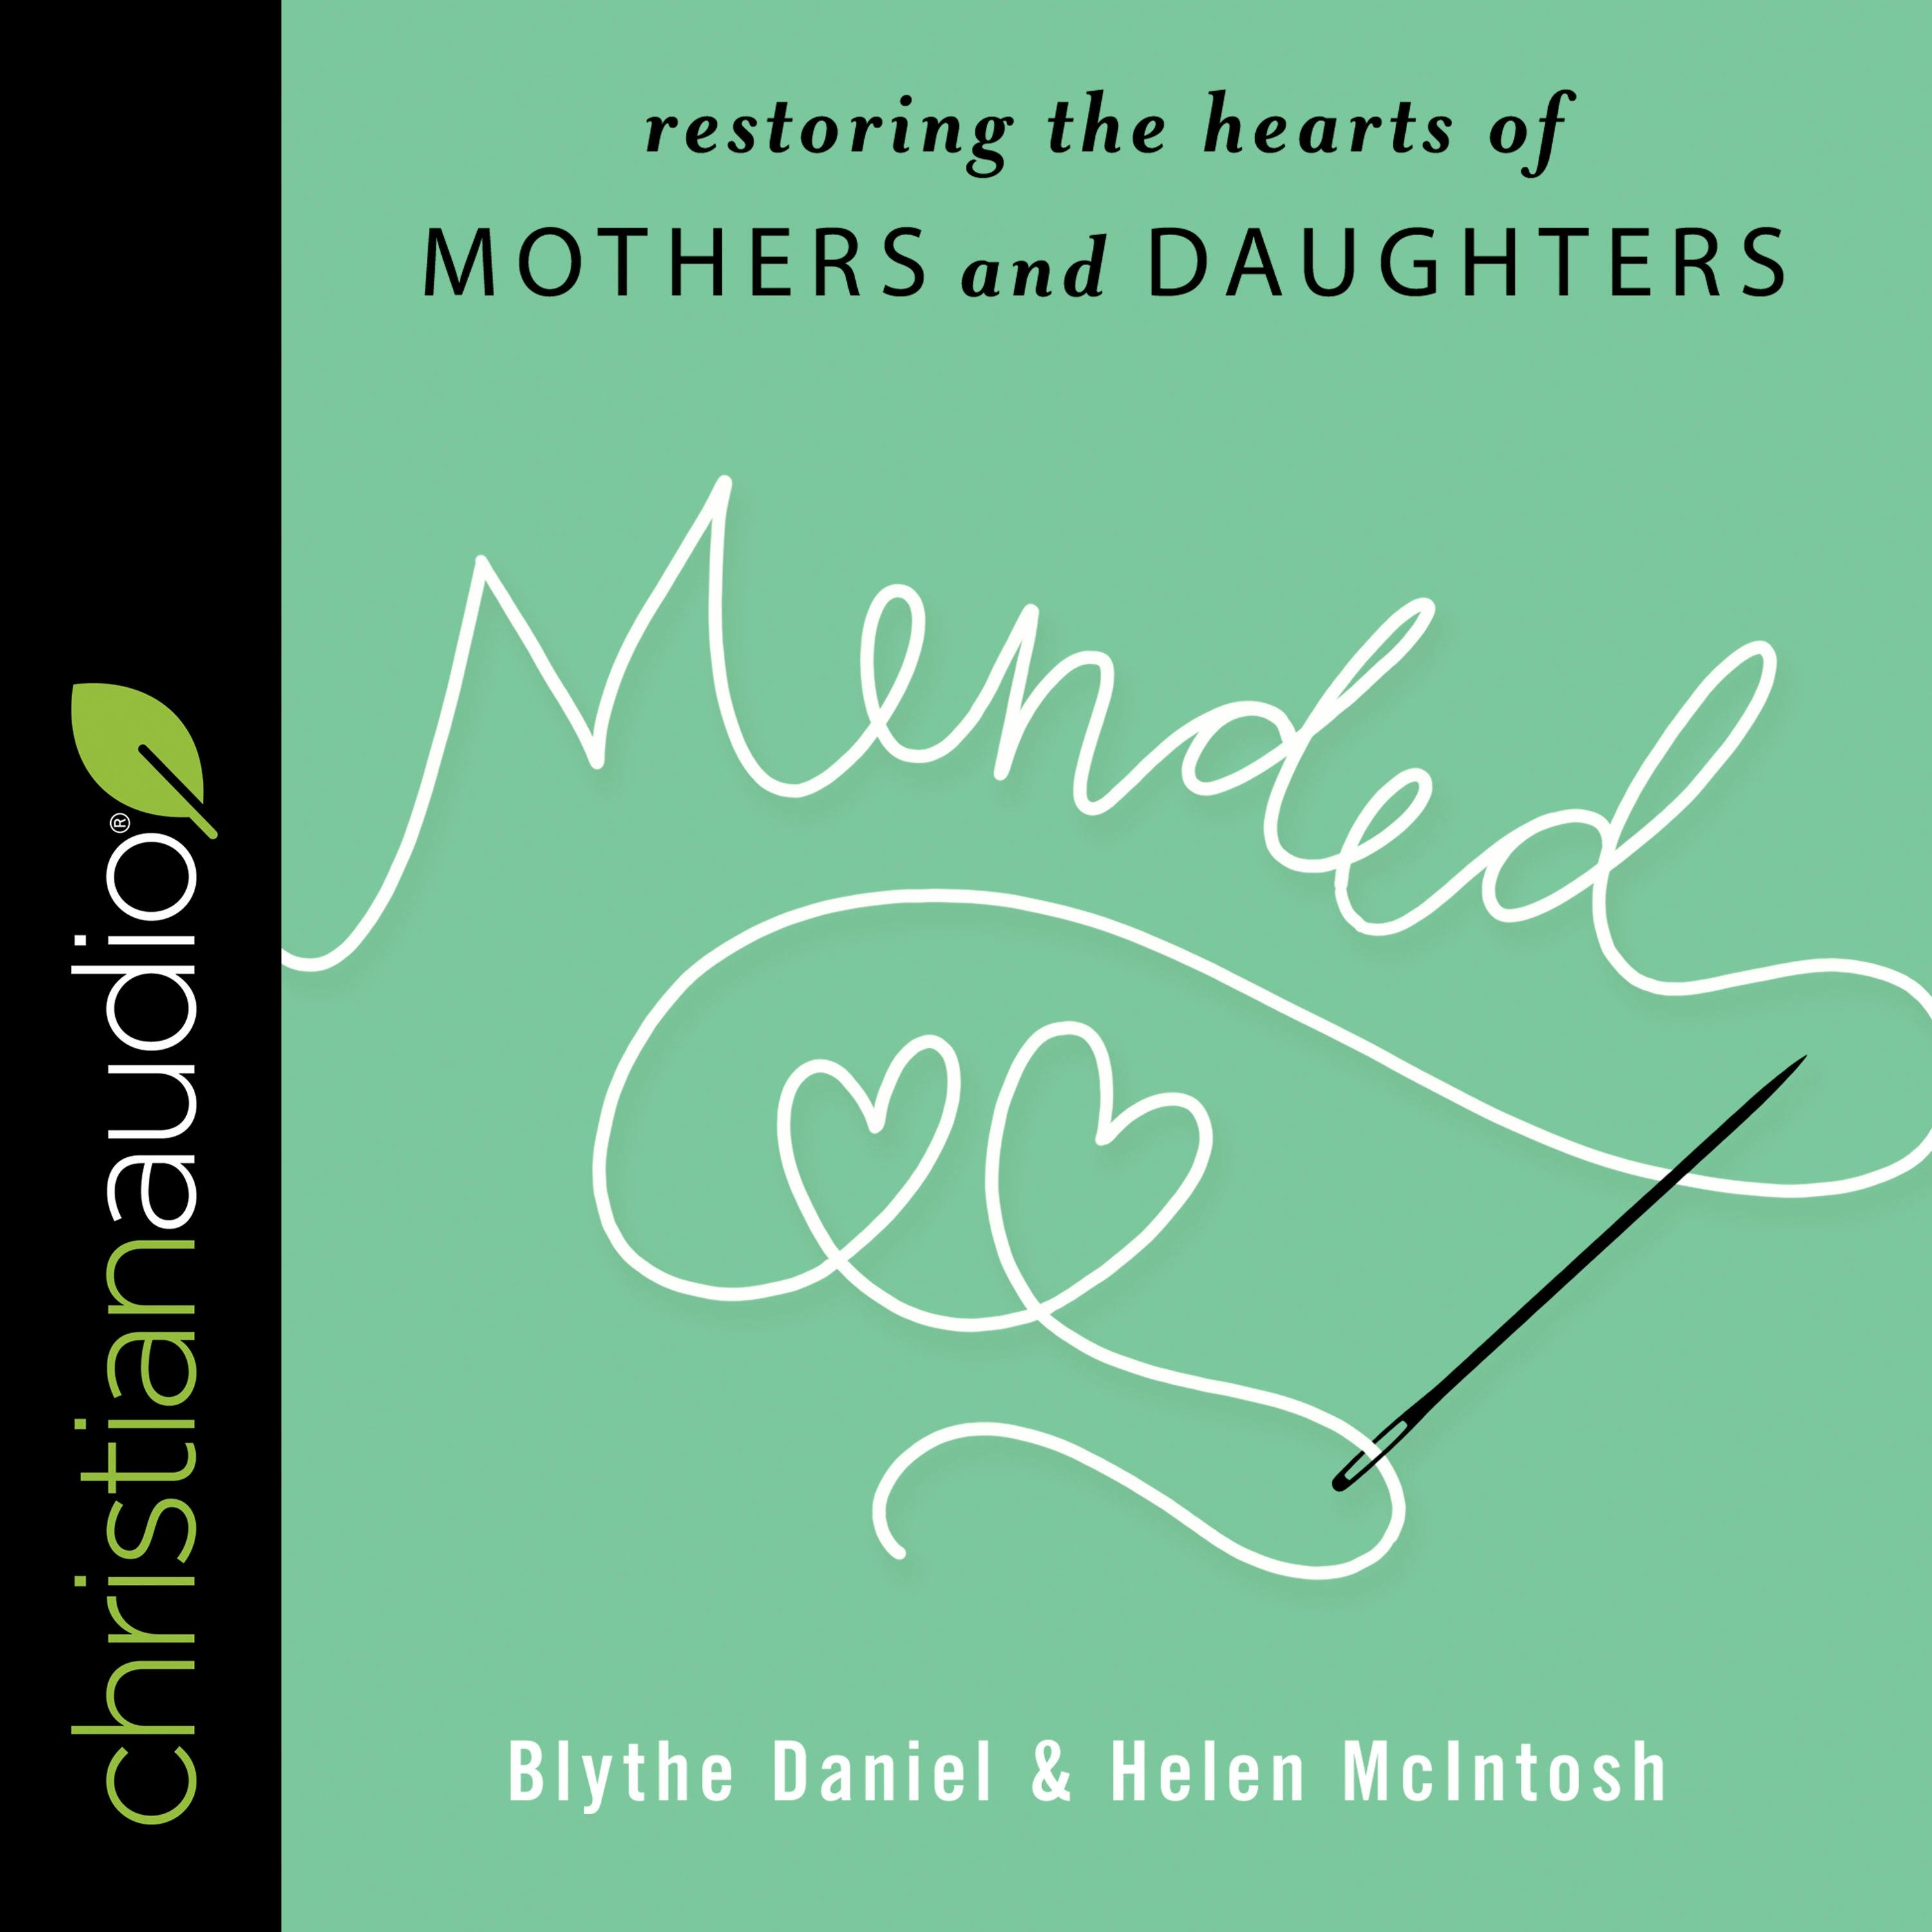 Mended: Restoring the Hearts of Mothers and Daughters - Blythe Daniel, Helen McIntosh